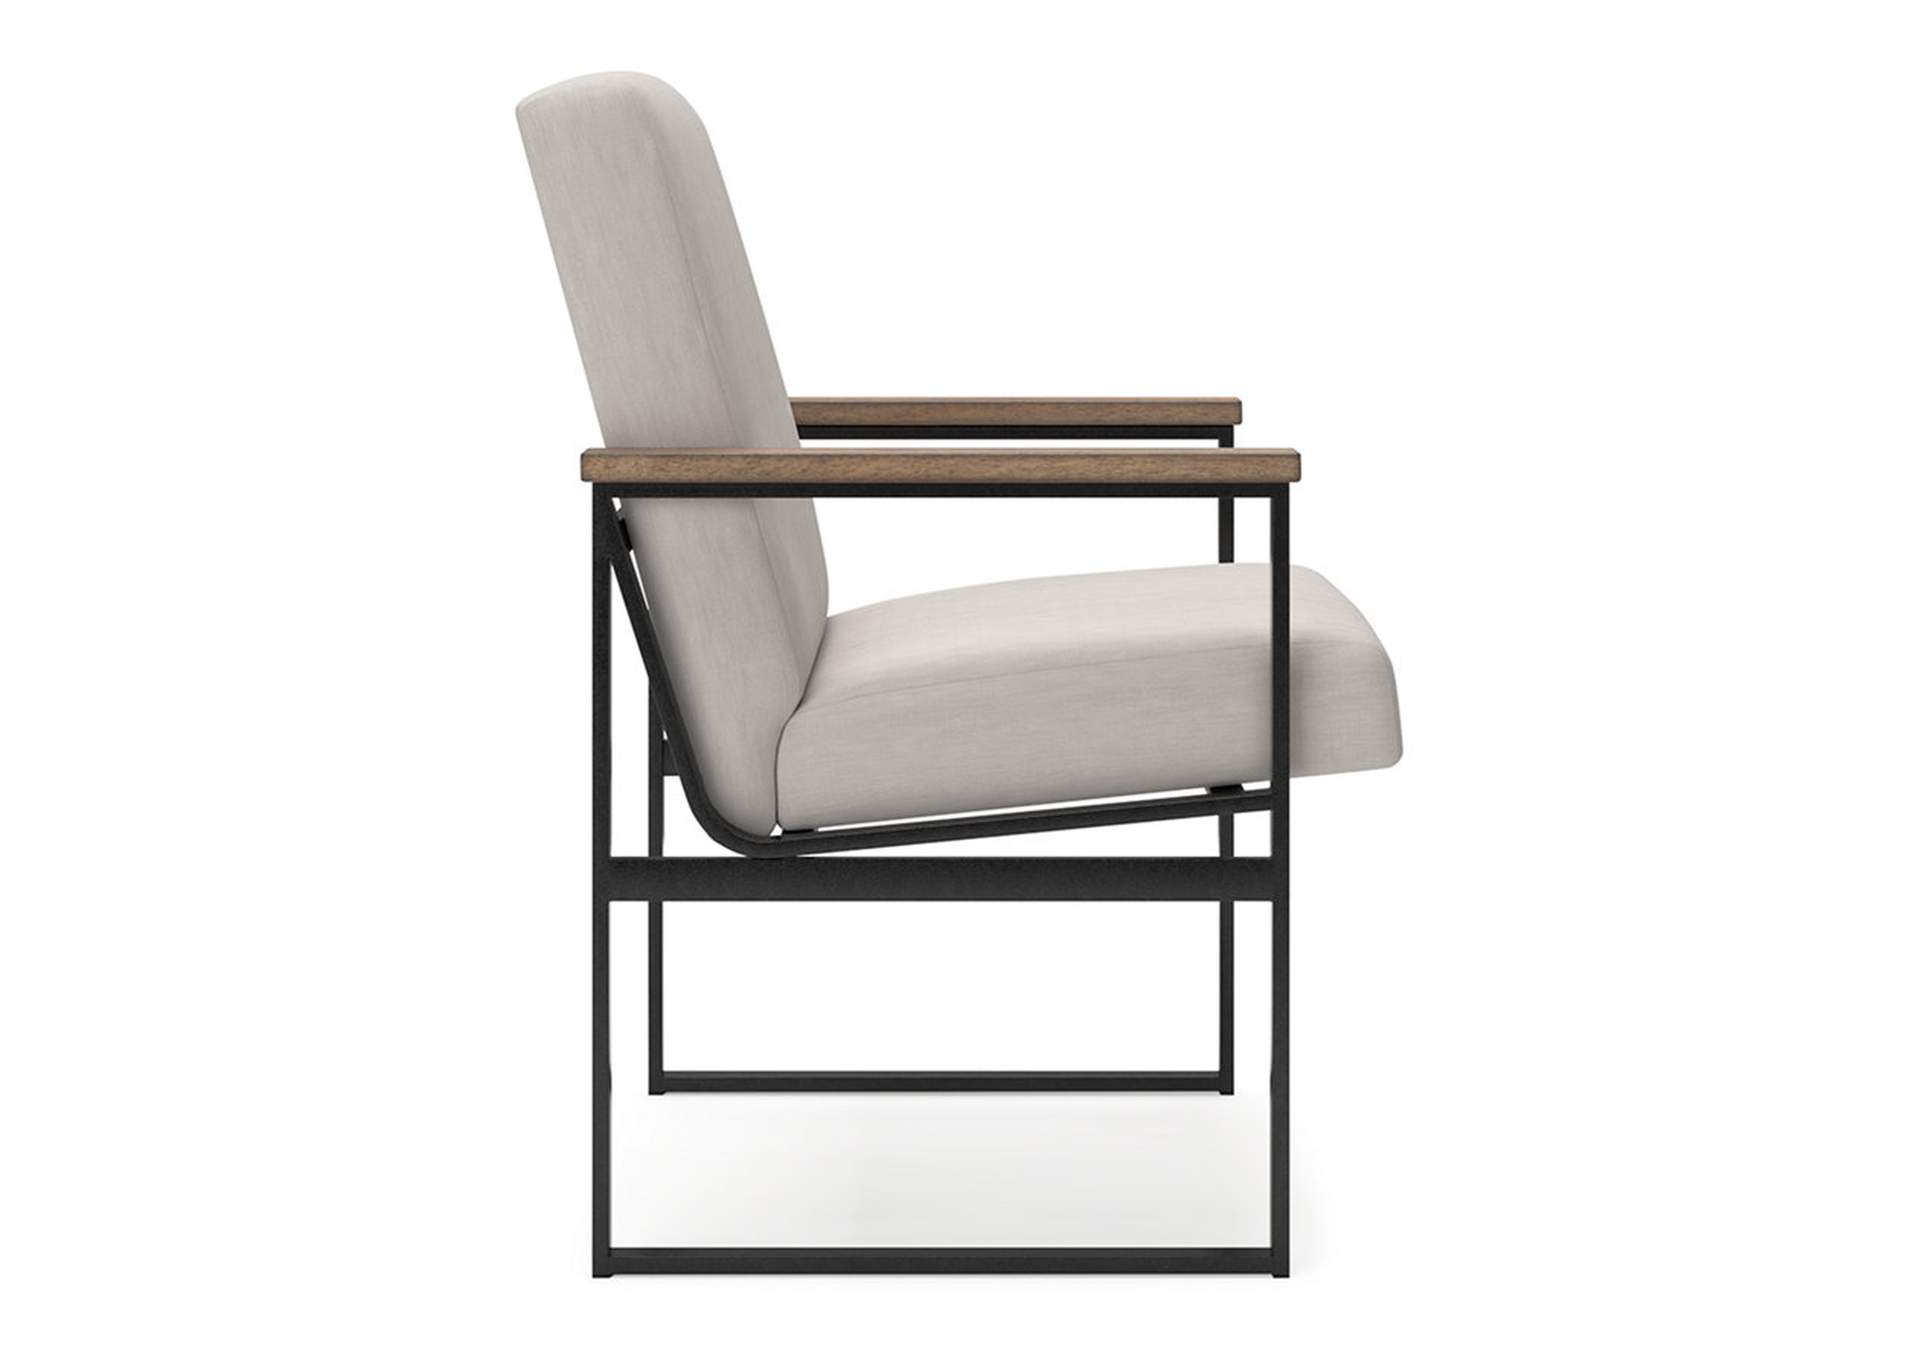 Montia Home Office Desk Chair,Signature Design By Ashley